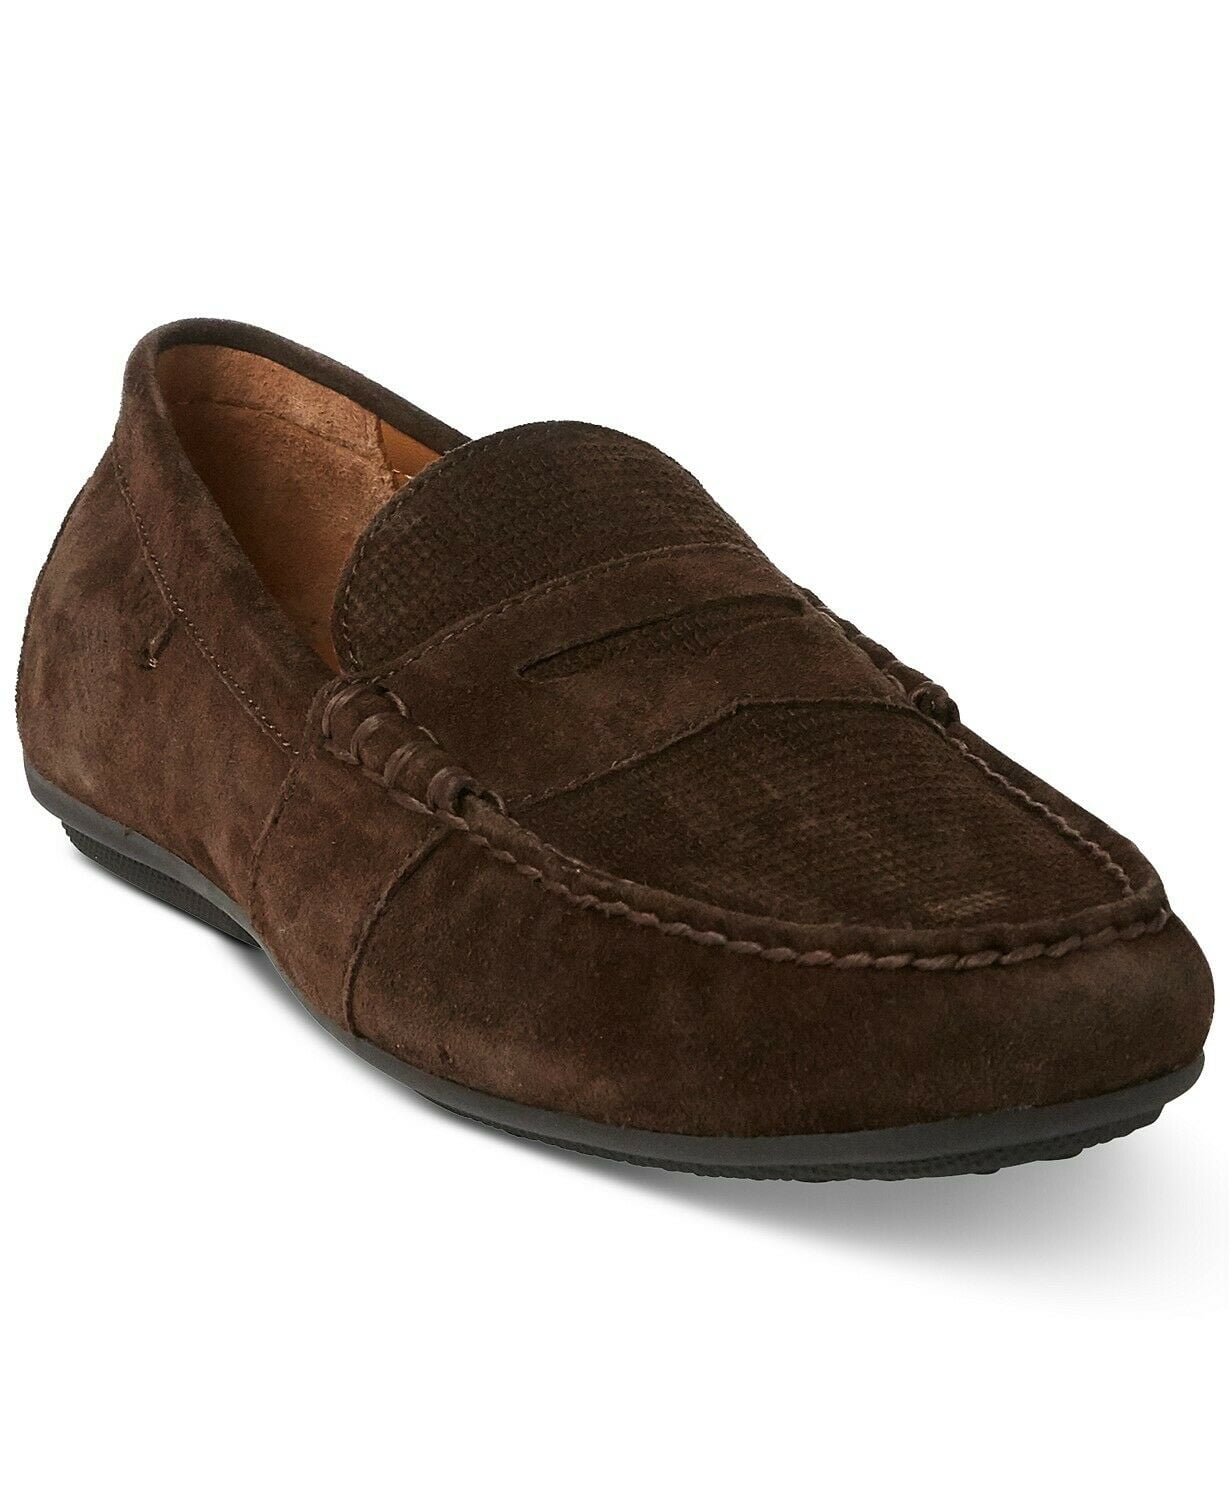 mens suede drivers